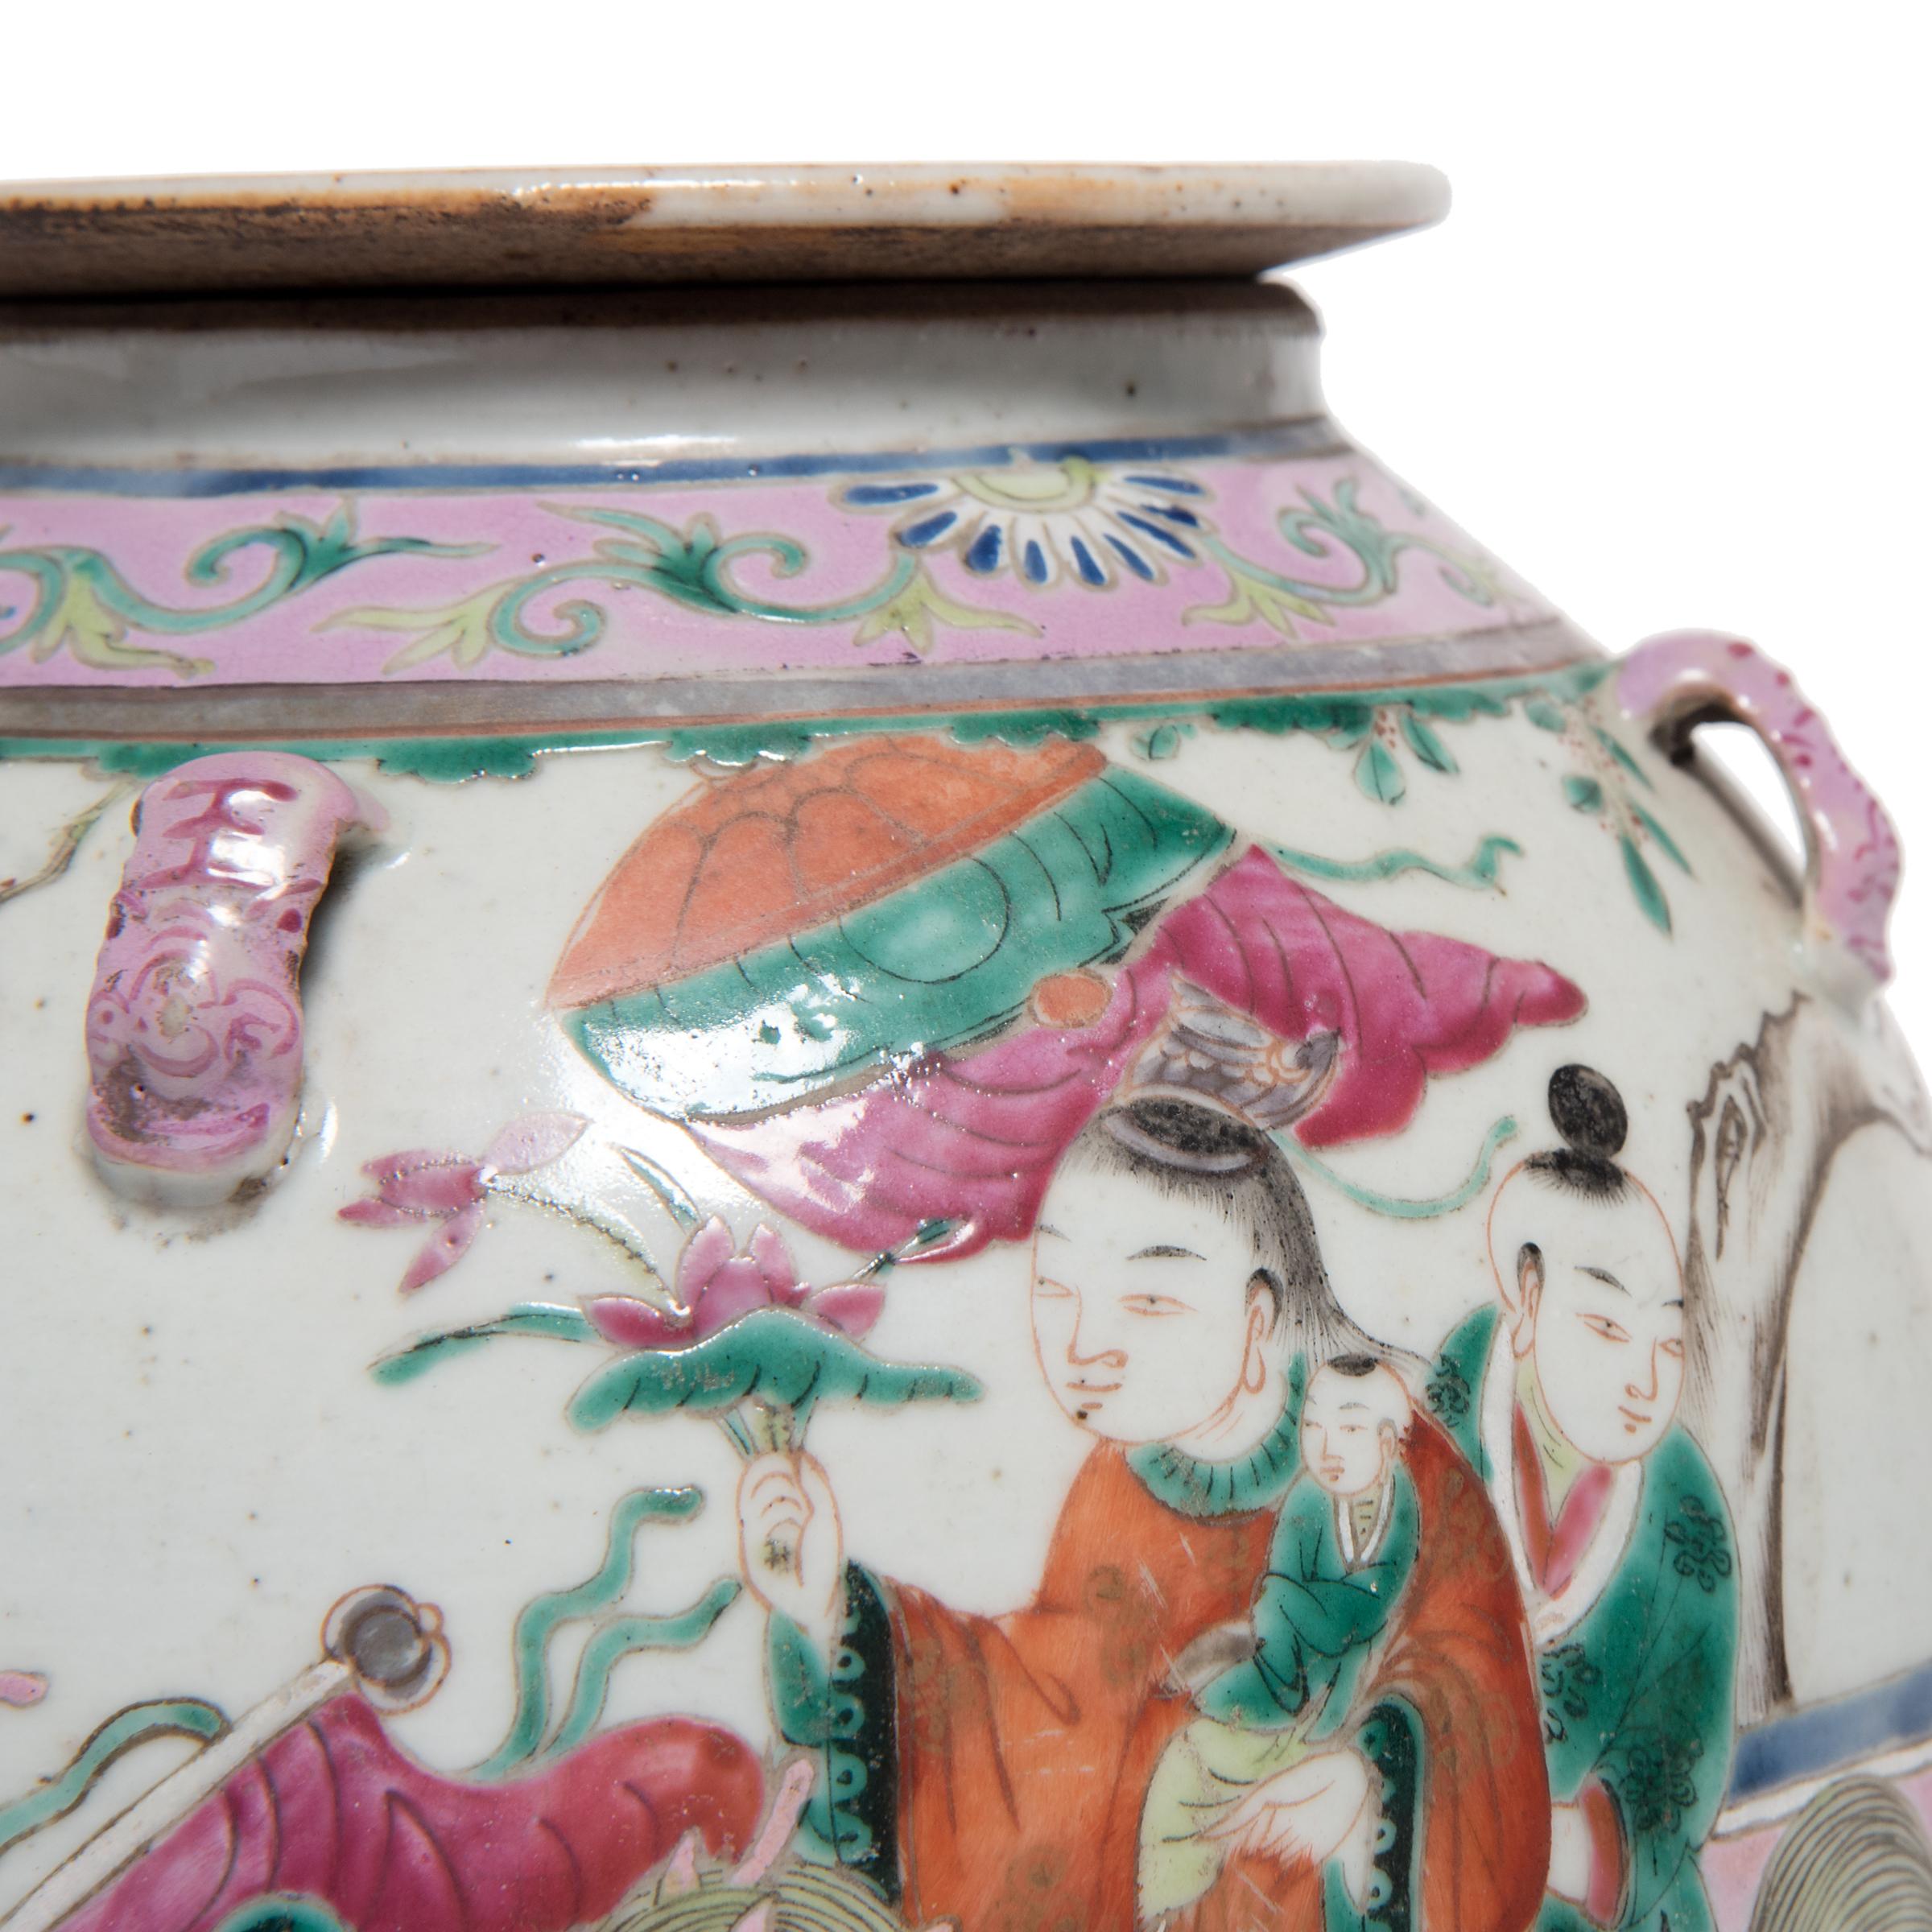 20th Century Chinese Enamelware Teapot with Goddess of Fertility, c. 1920